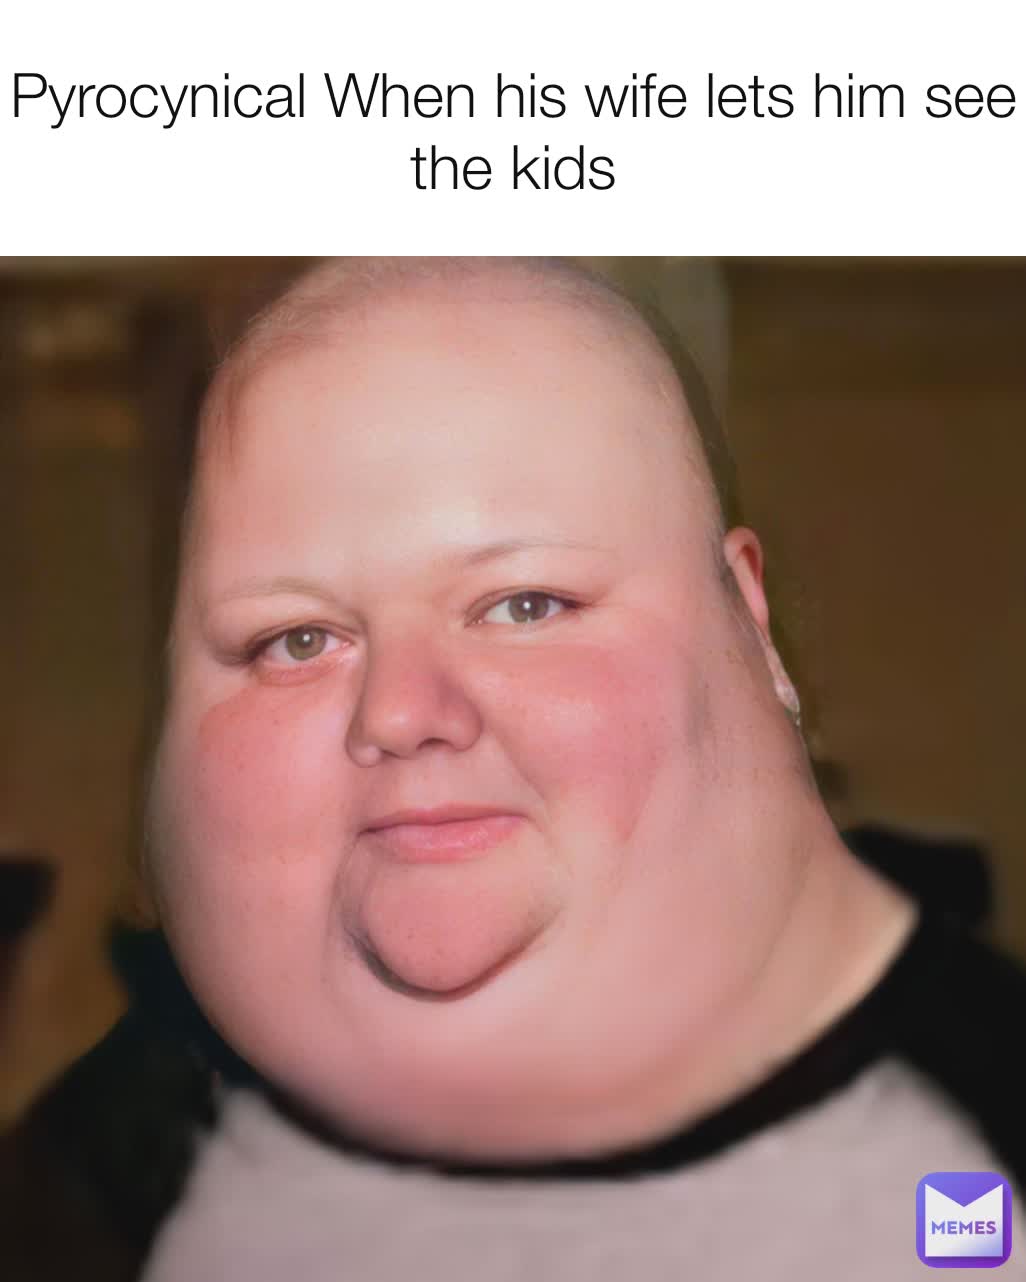 Pyrocynical When his wife lets him see the kids